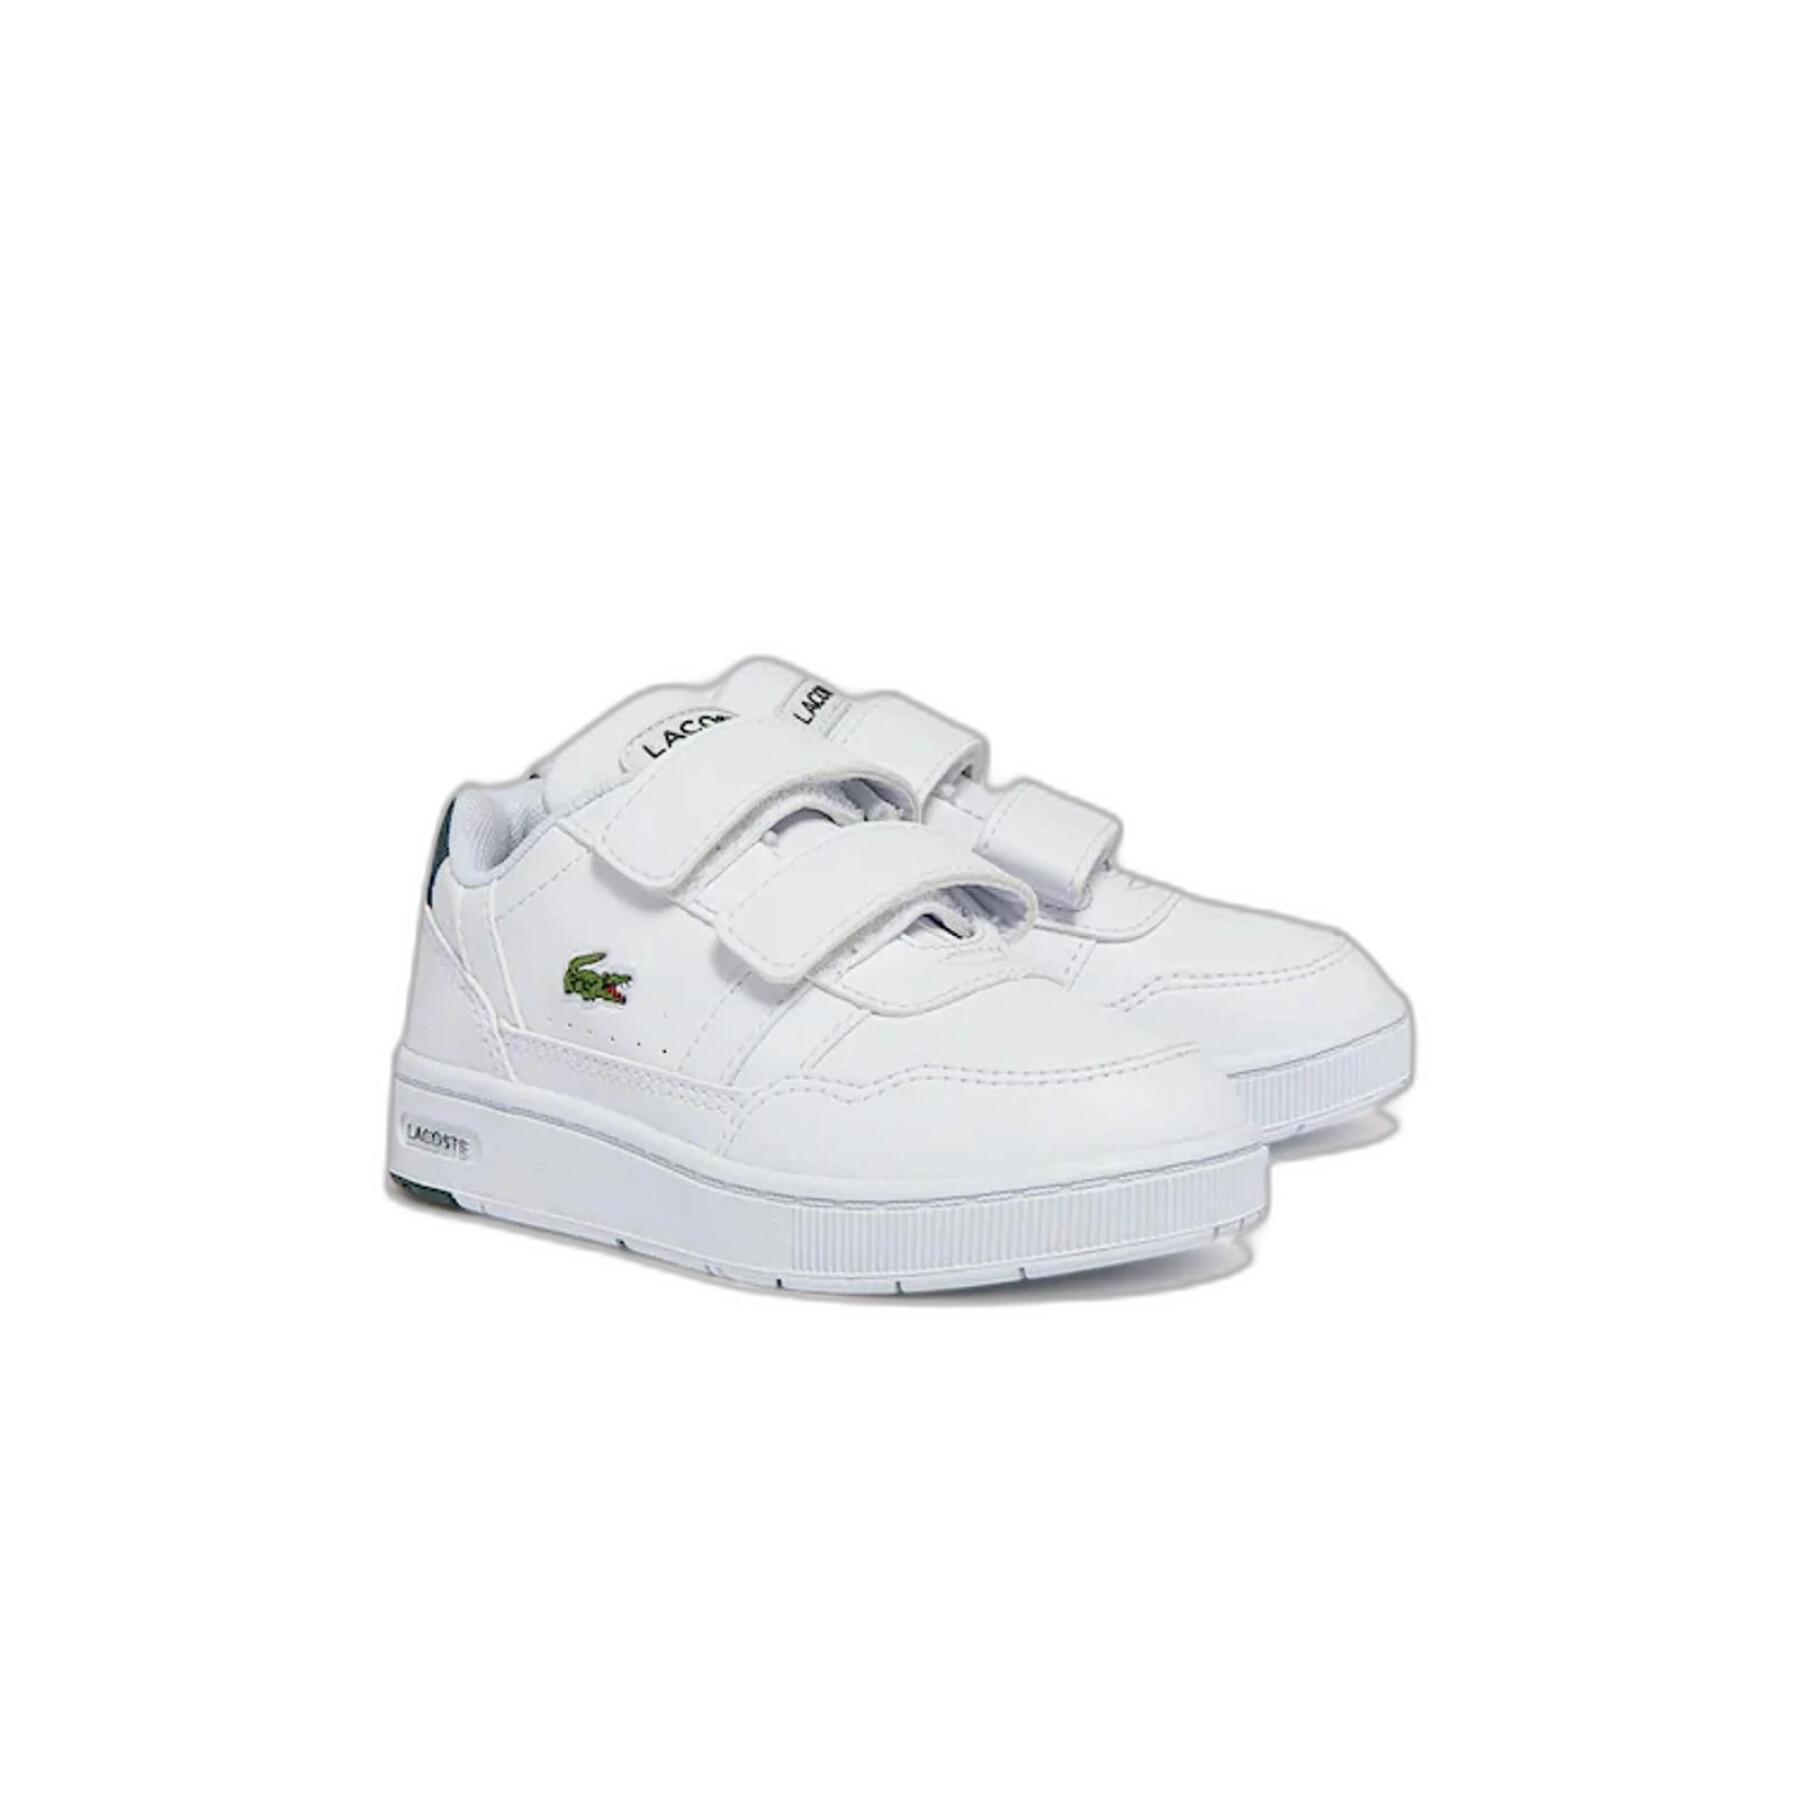 Babytrainers Lacoste T-Clip